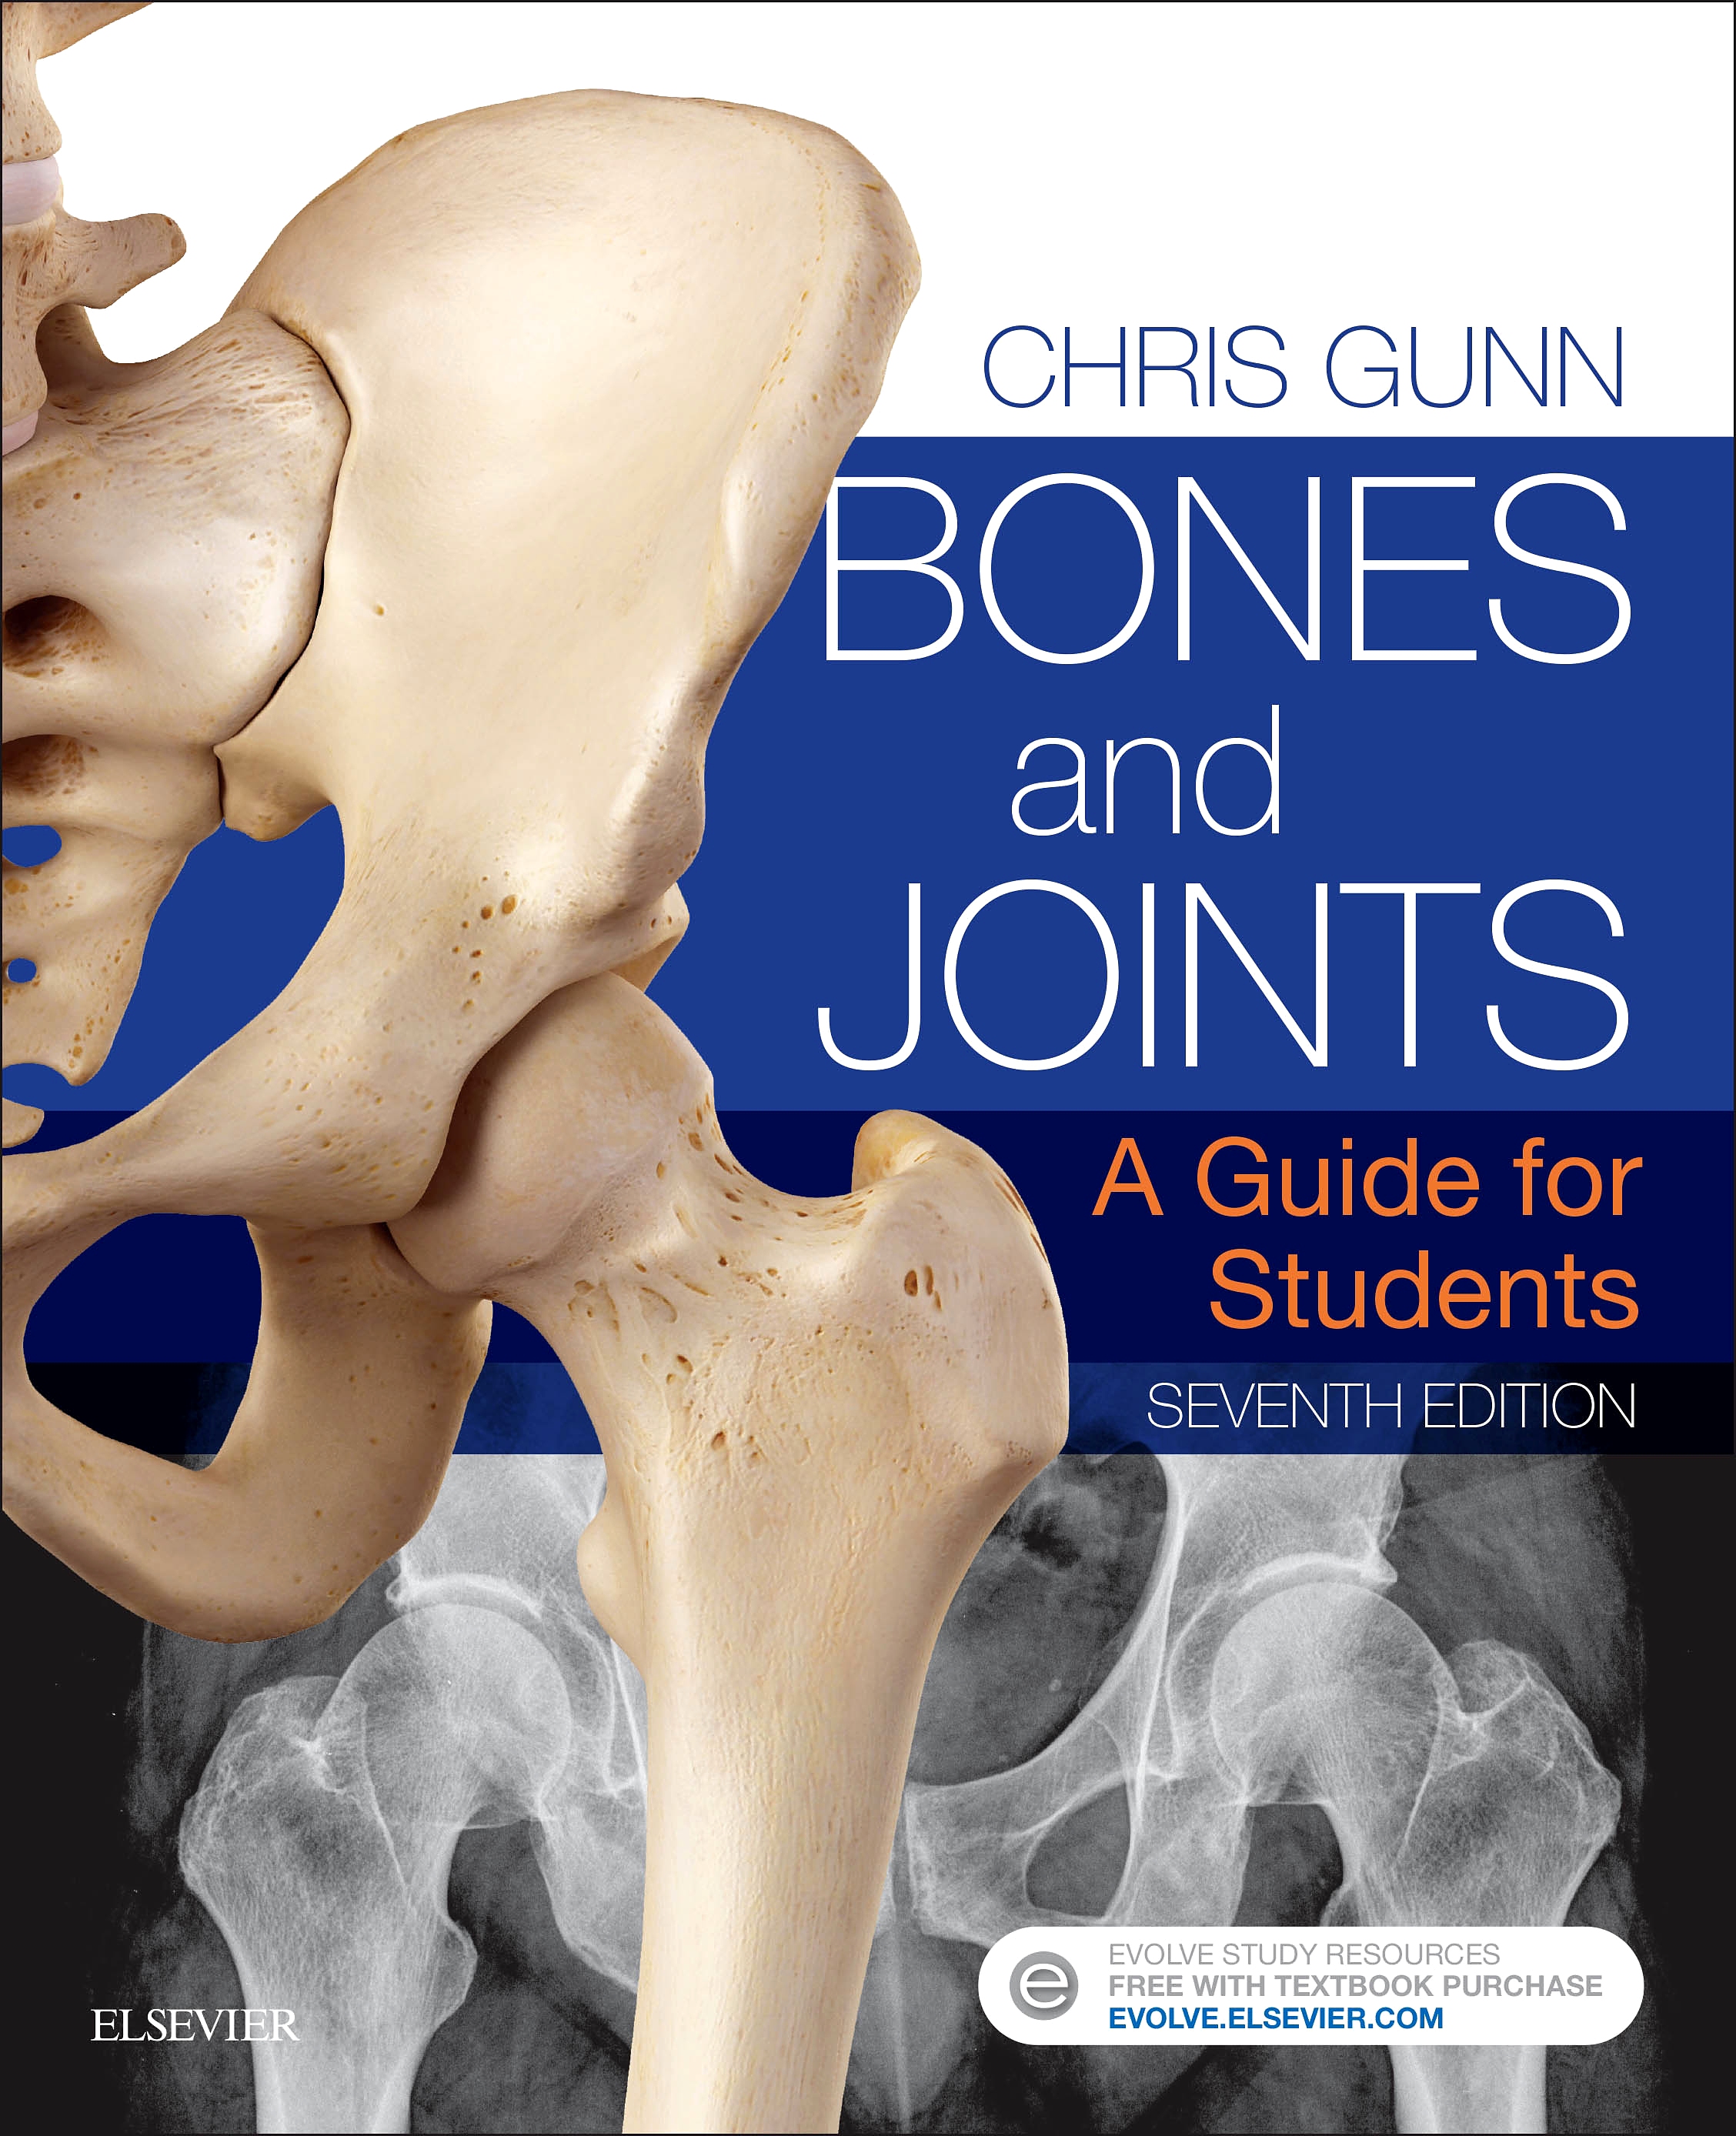 Evolve Resources for Bones and Joints, 7th Edition